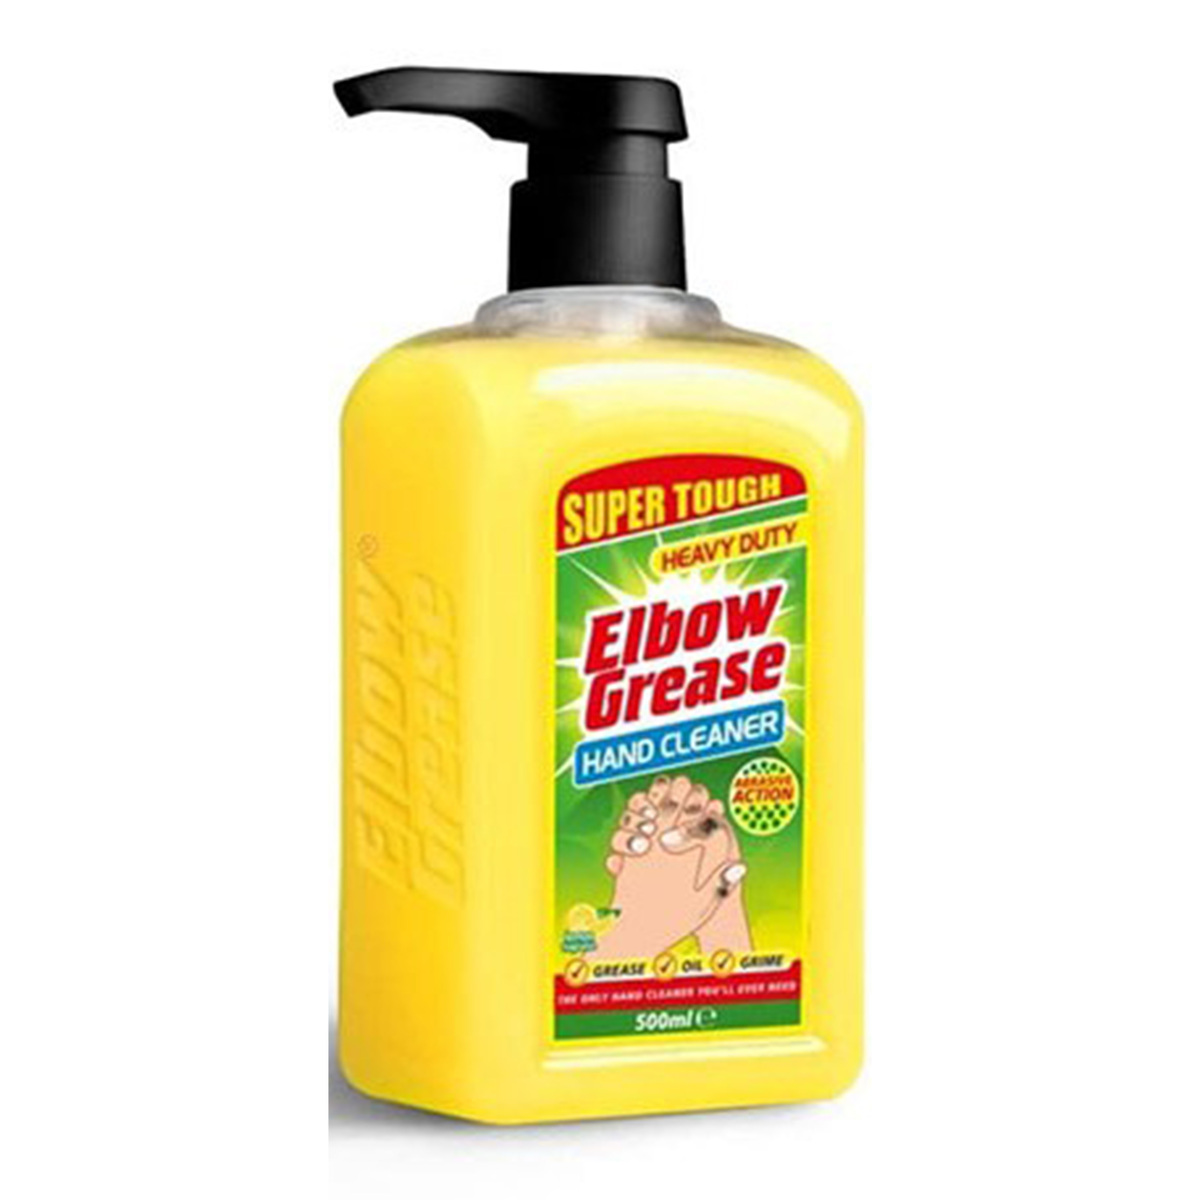 Elbow Grease Cleaning